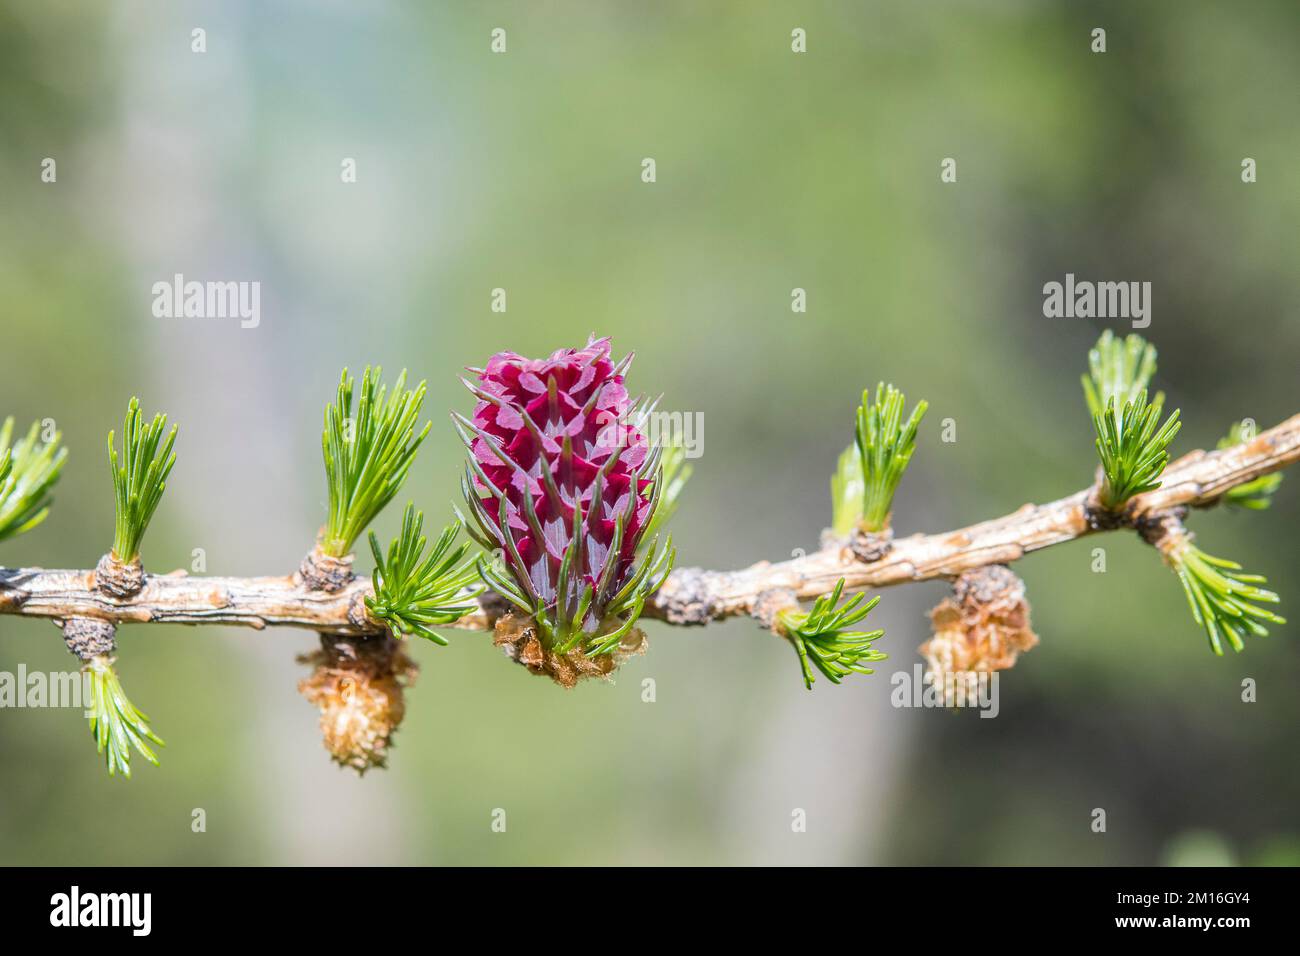 Larix decidua, the European larch, is a species of larch native to the mountains of central Europe, female and male flower. Stock Photo